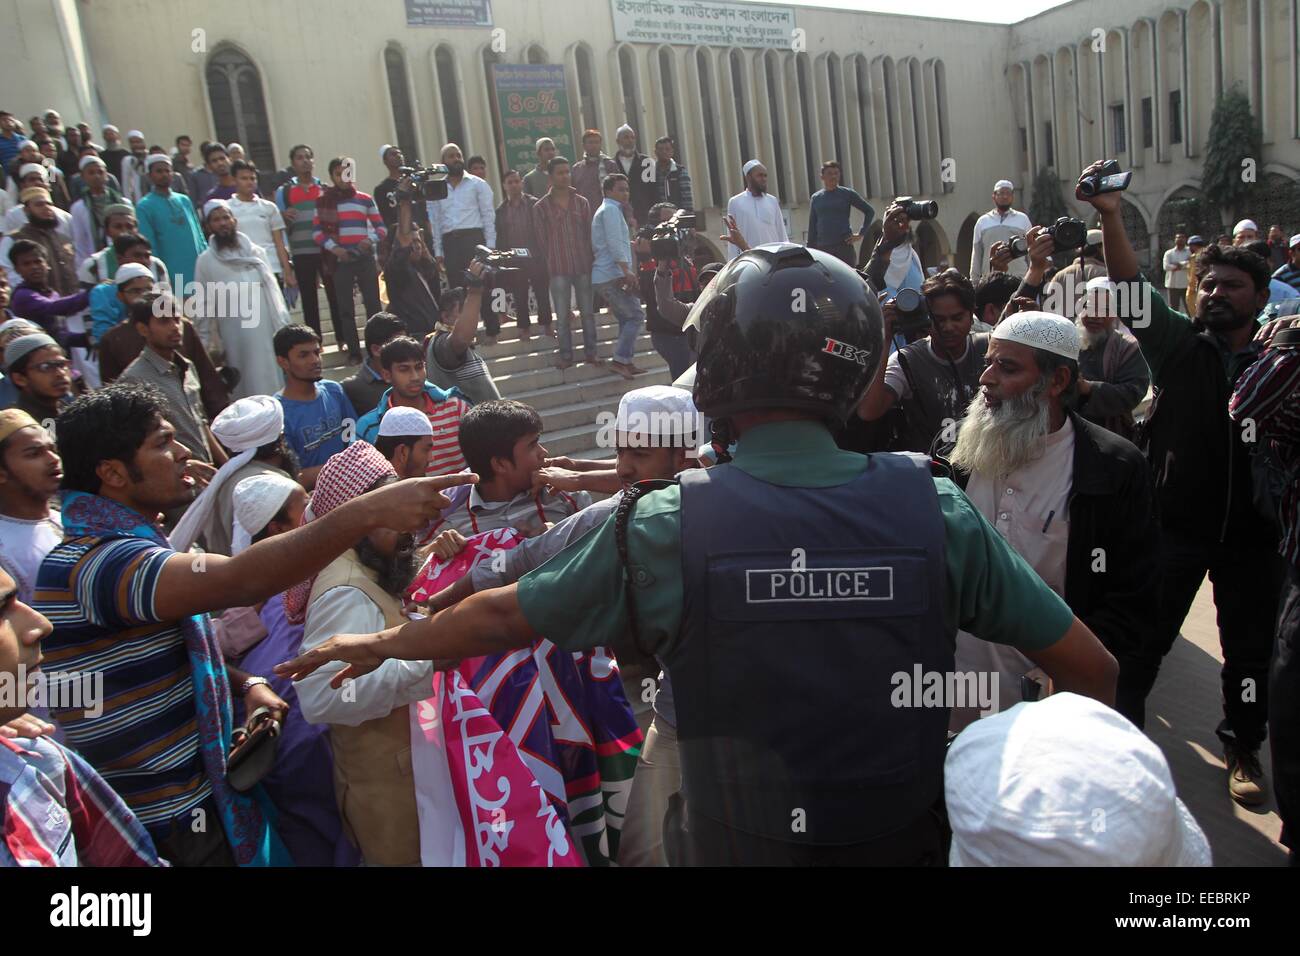 Dhaka, Bangladesh. 15th January, 2015. Bangladesh police try to arrest a protester, center, outside the Bangladesh National Mosque during a protest in Dhaka, Bangladesh, Thursday, Jan. 15, 2015. The protest was against Bangladeshi Prime Minister and leader of the Awami League party Sheikh Hasina and former telecommunication minister Abdul Latif Siddique after his alleged anti-Islam comments at a rally. Photo: Monirul Alam © Monirul Alam/ZUMA Wire/Alamy Live News Stock Photo